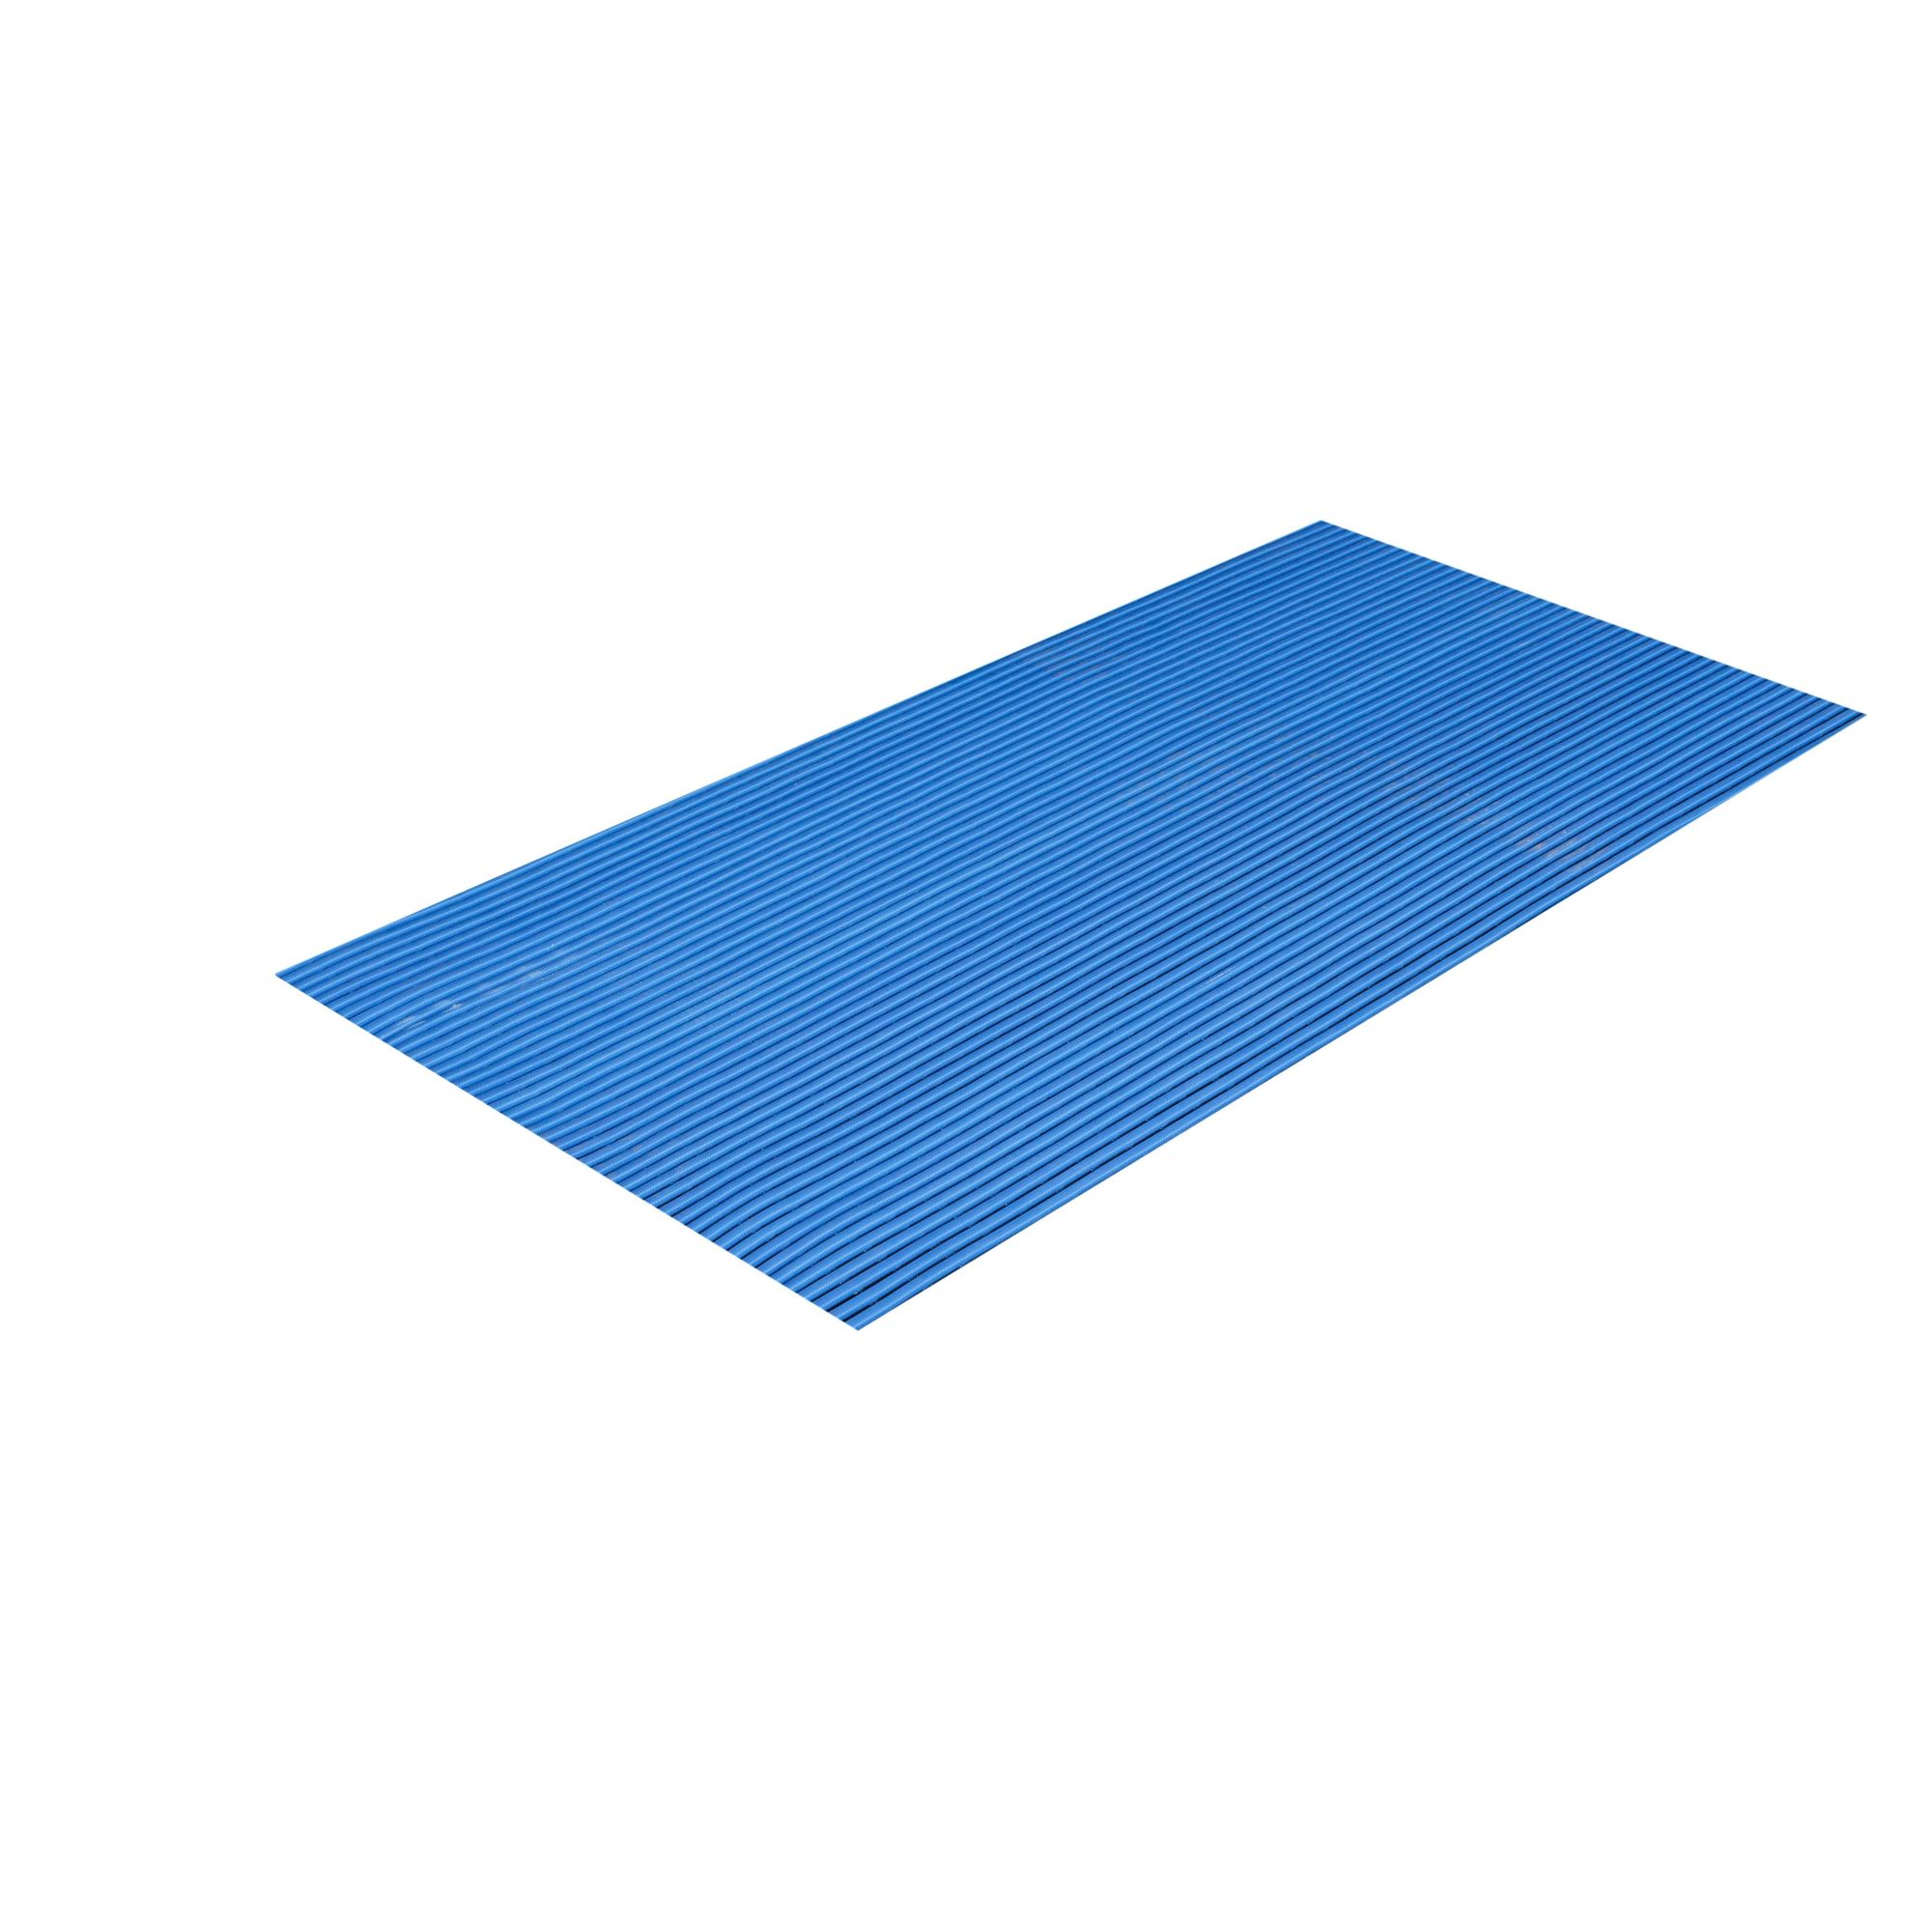 Crown Matting Technologies, Sani-Tred 2ft.x40ft. Ocean Blue, Width 24 in, Length 480 in, Thickness 15/32 in, Model HVR0024OB